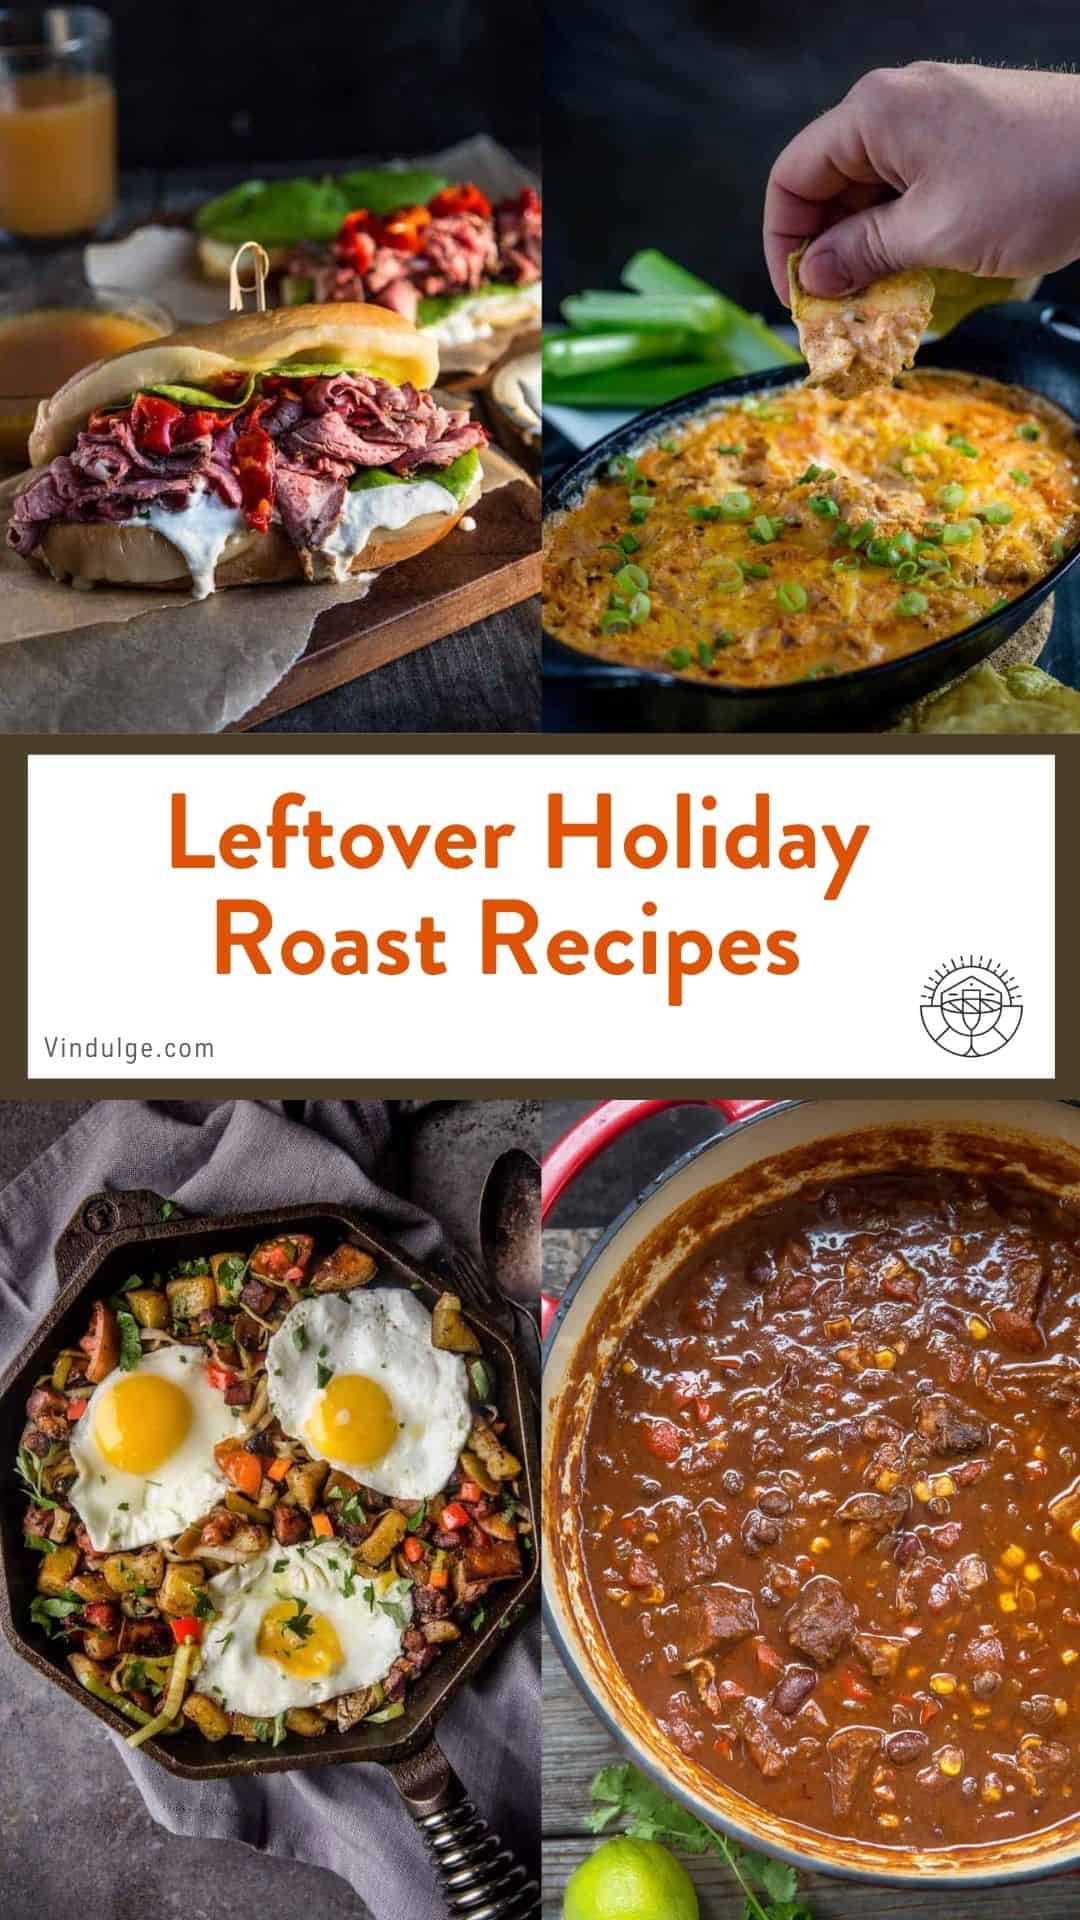 A photo collage with images of uses for leftover holiday roasts such as leftover turkey or prime rib